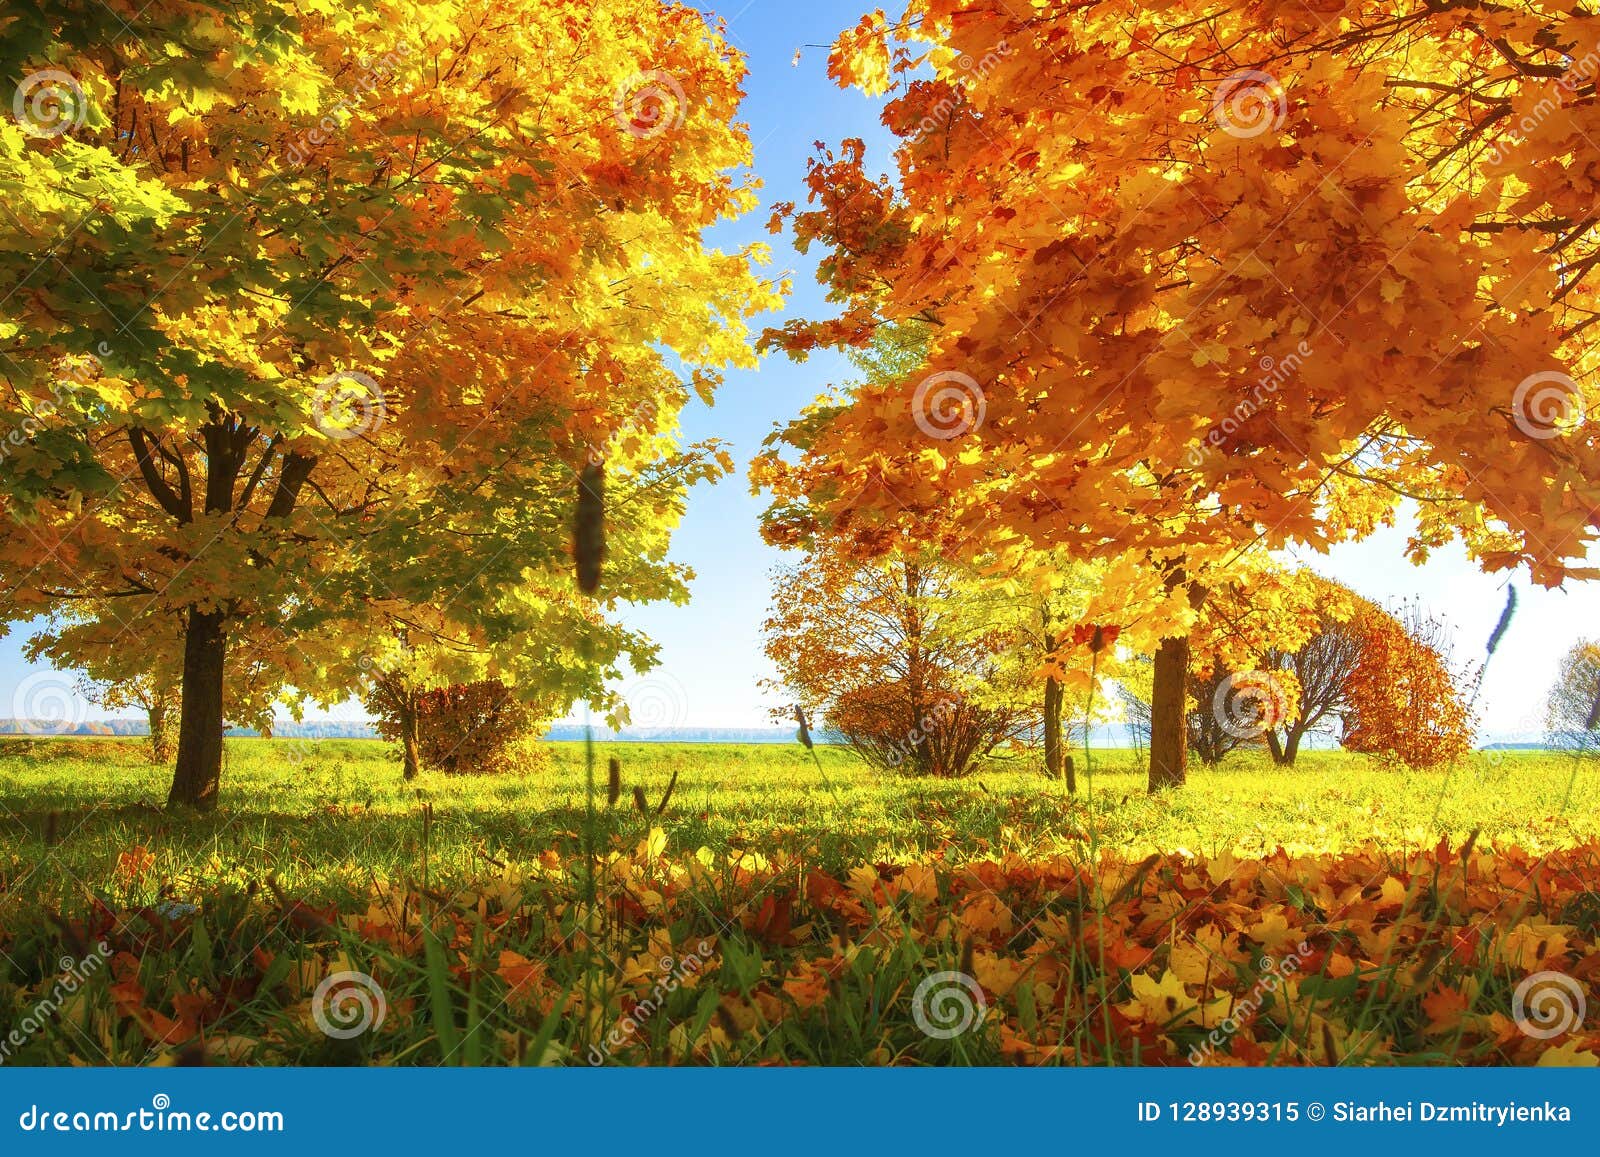 vibrant color of leaves on trees in autumn park on sunny clear day. autumnal landscape. fall. vivid colourful nature